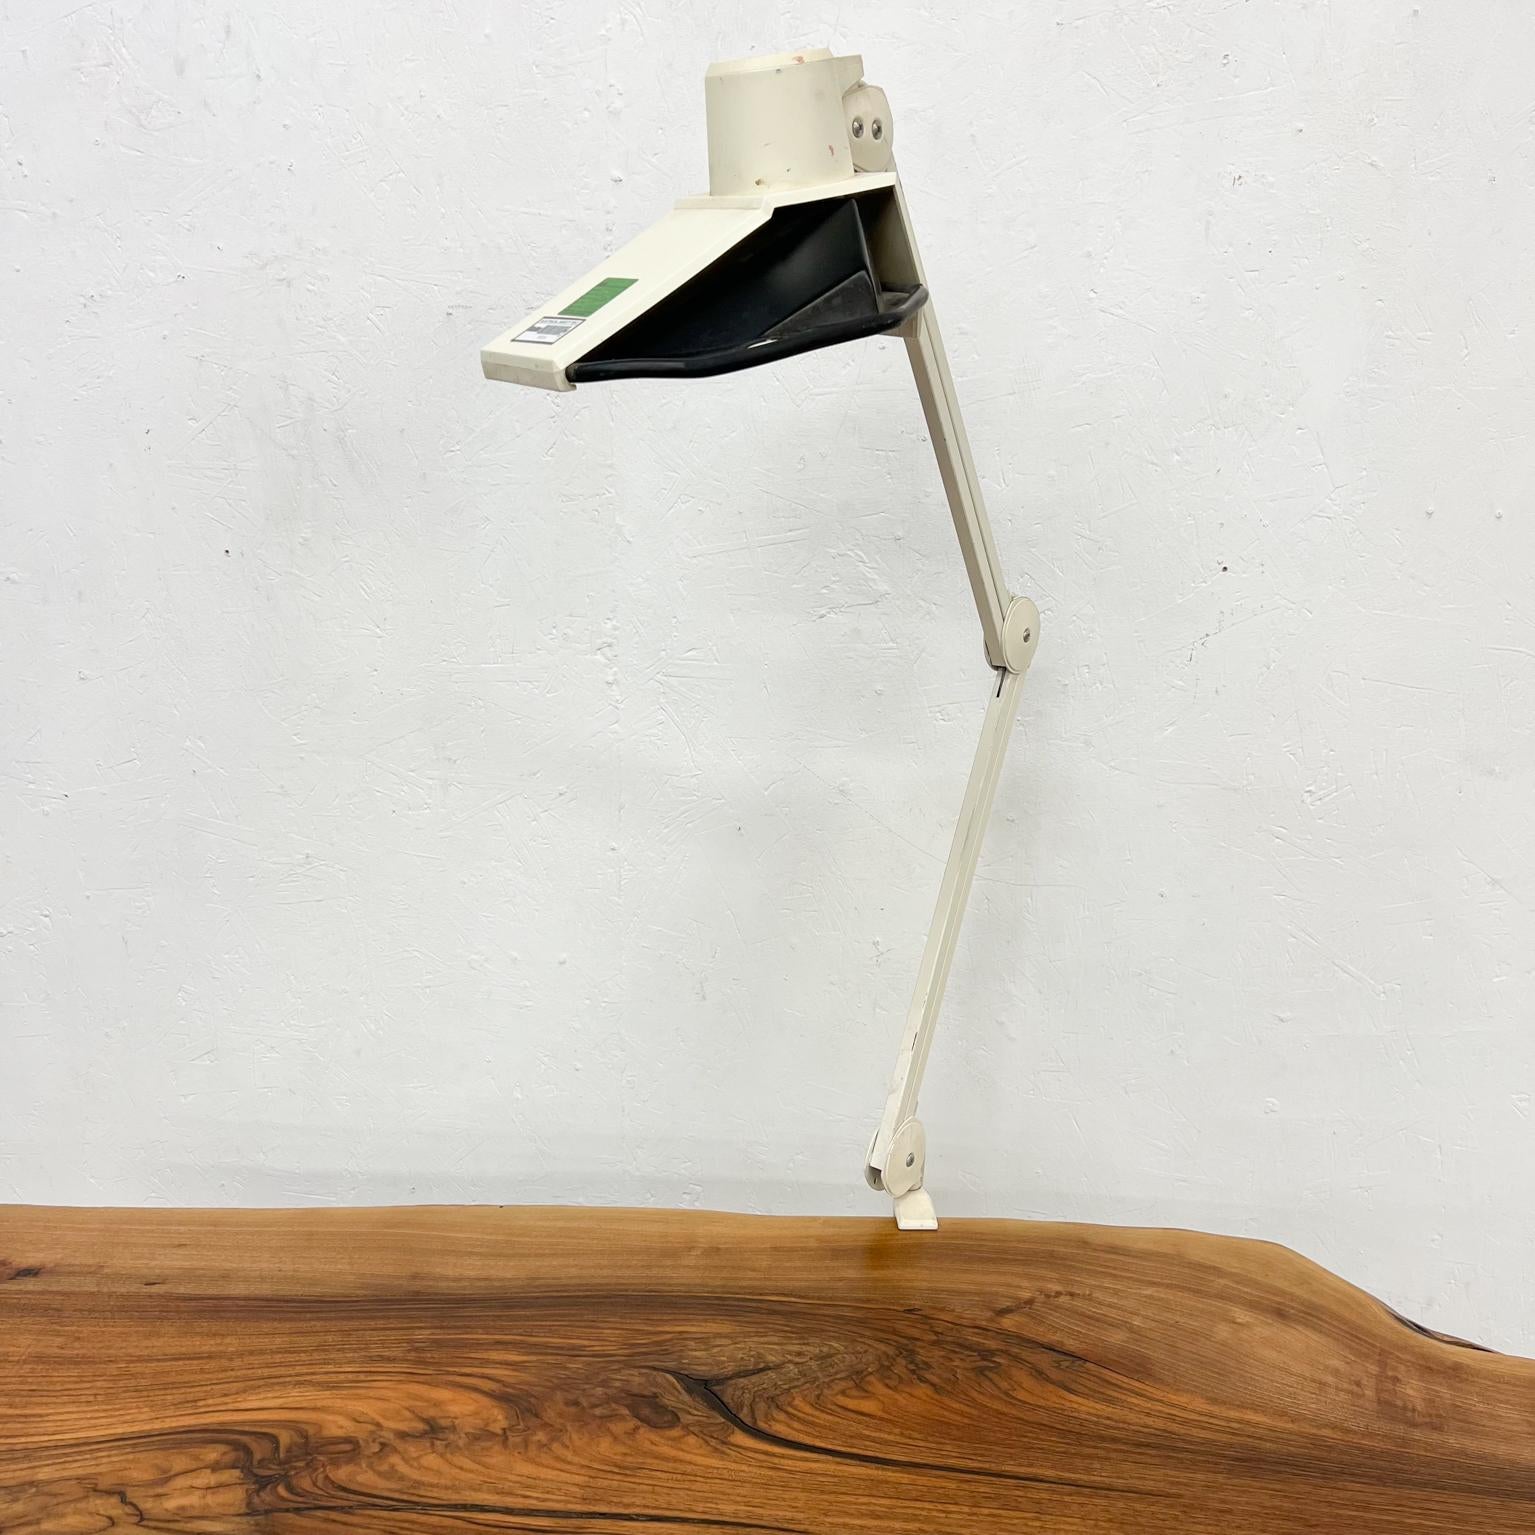 1970s By Luxo Industrial Metal Architect Task clamp lamp for desk
Design attributed to Jacob Jacobsen (Finland)
Fully adjustable articulating.
Very unusual task lamp.
Tested and currently working.
Stamped with maker's information.
32.5 tall x.